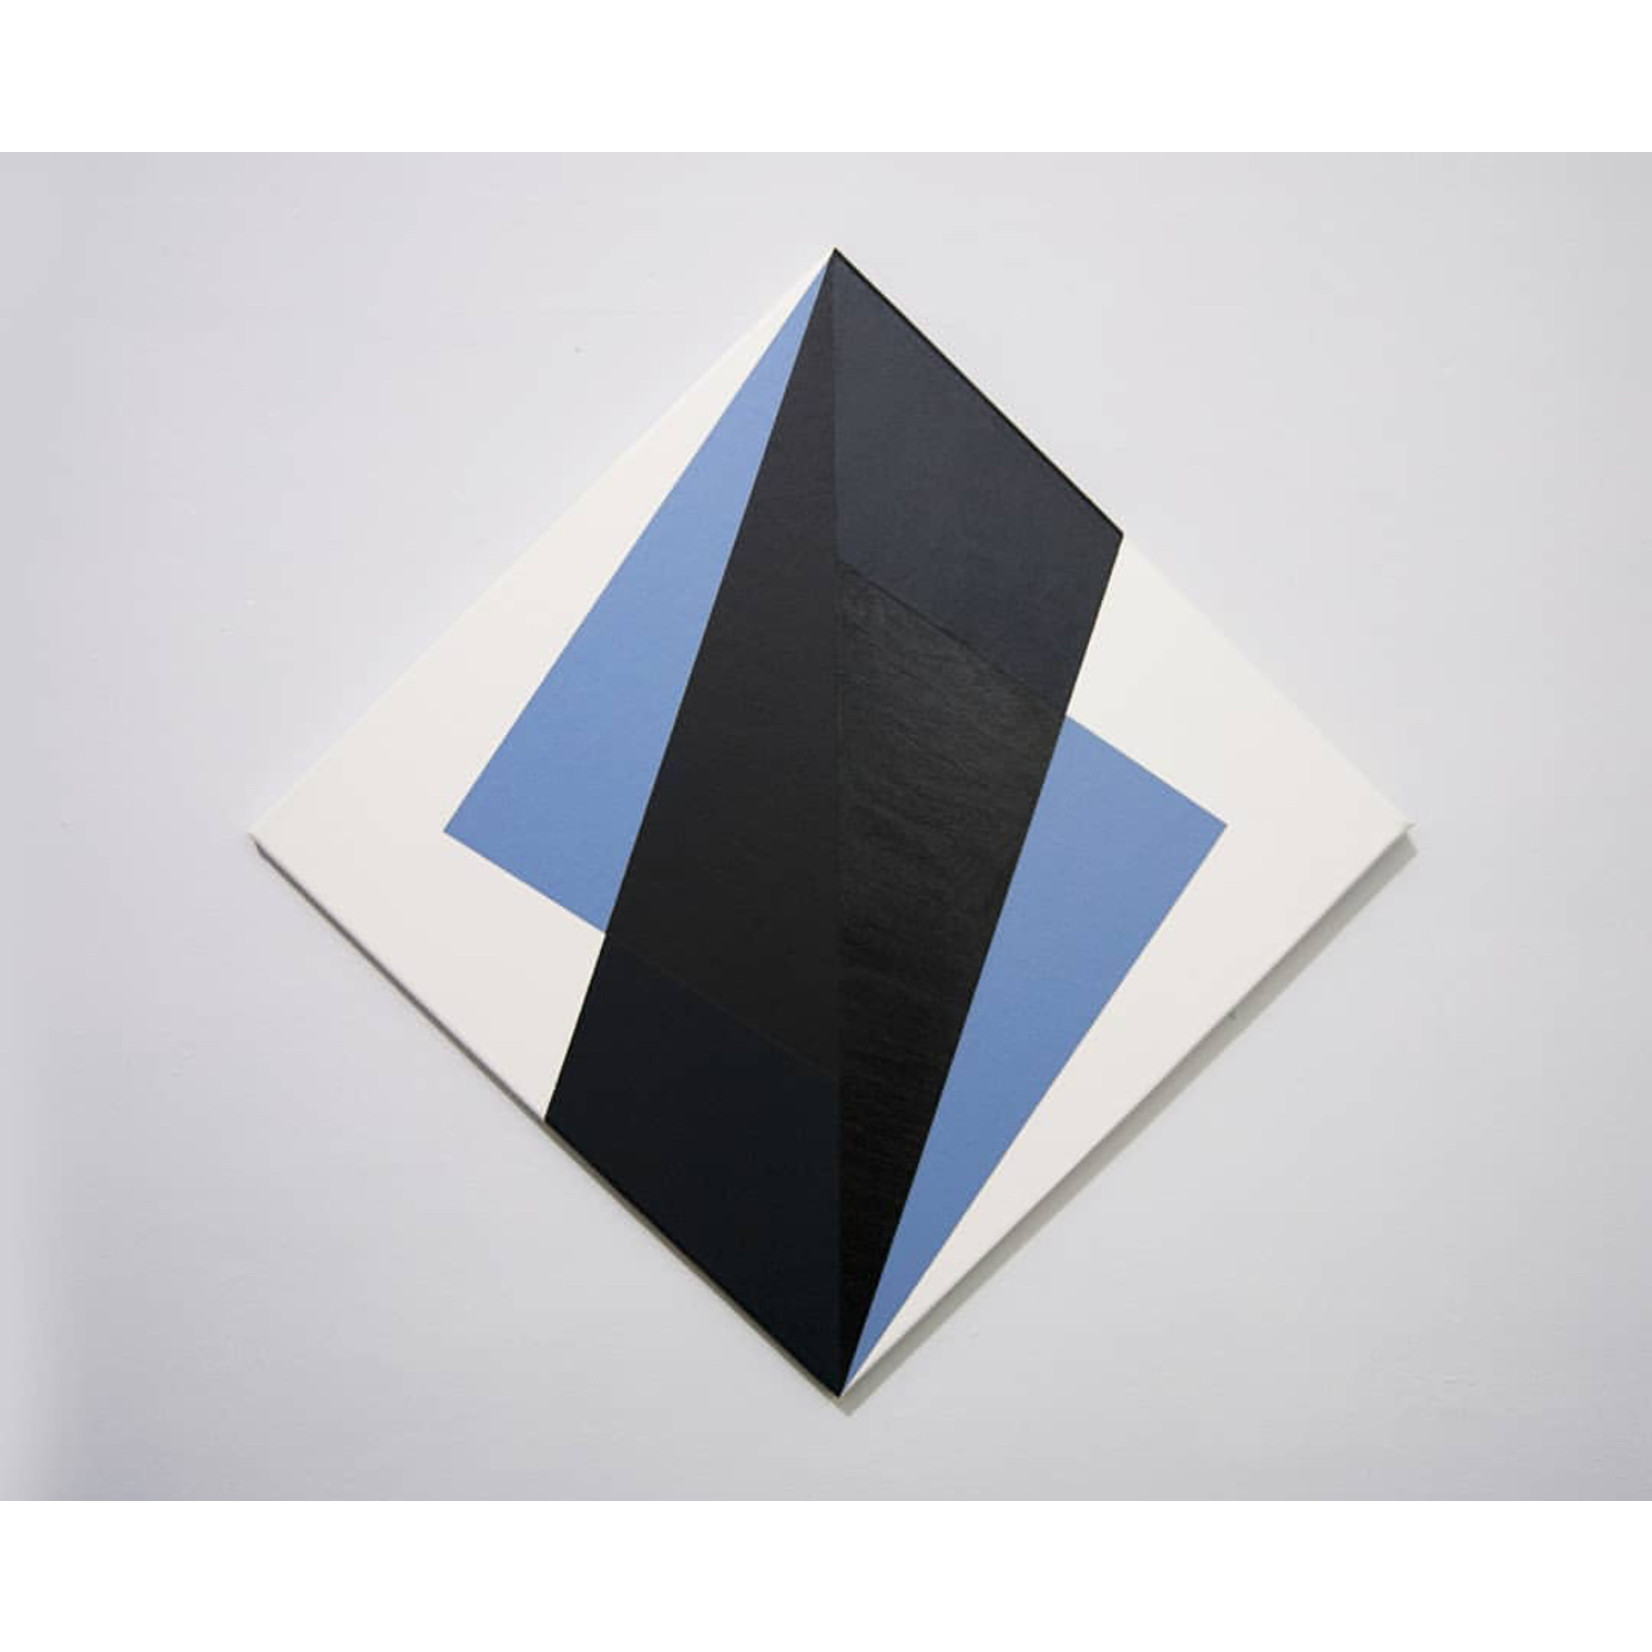 Stretched Print on Canvas As a Square 02 by Rodrigo Martin